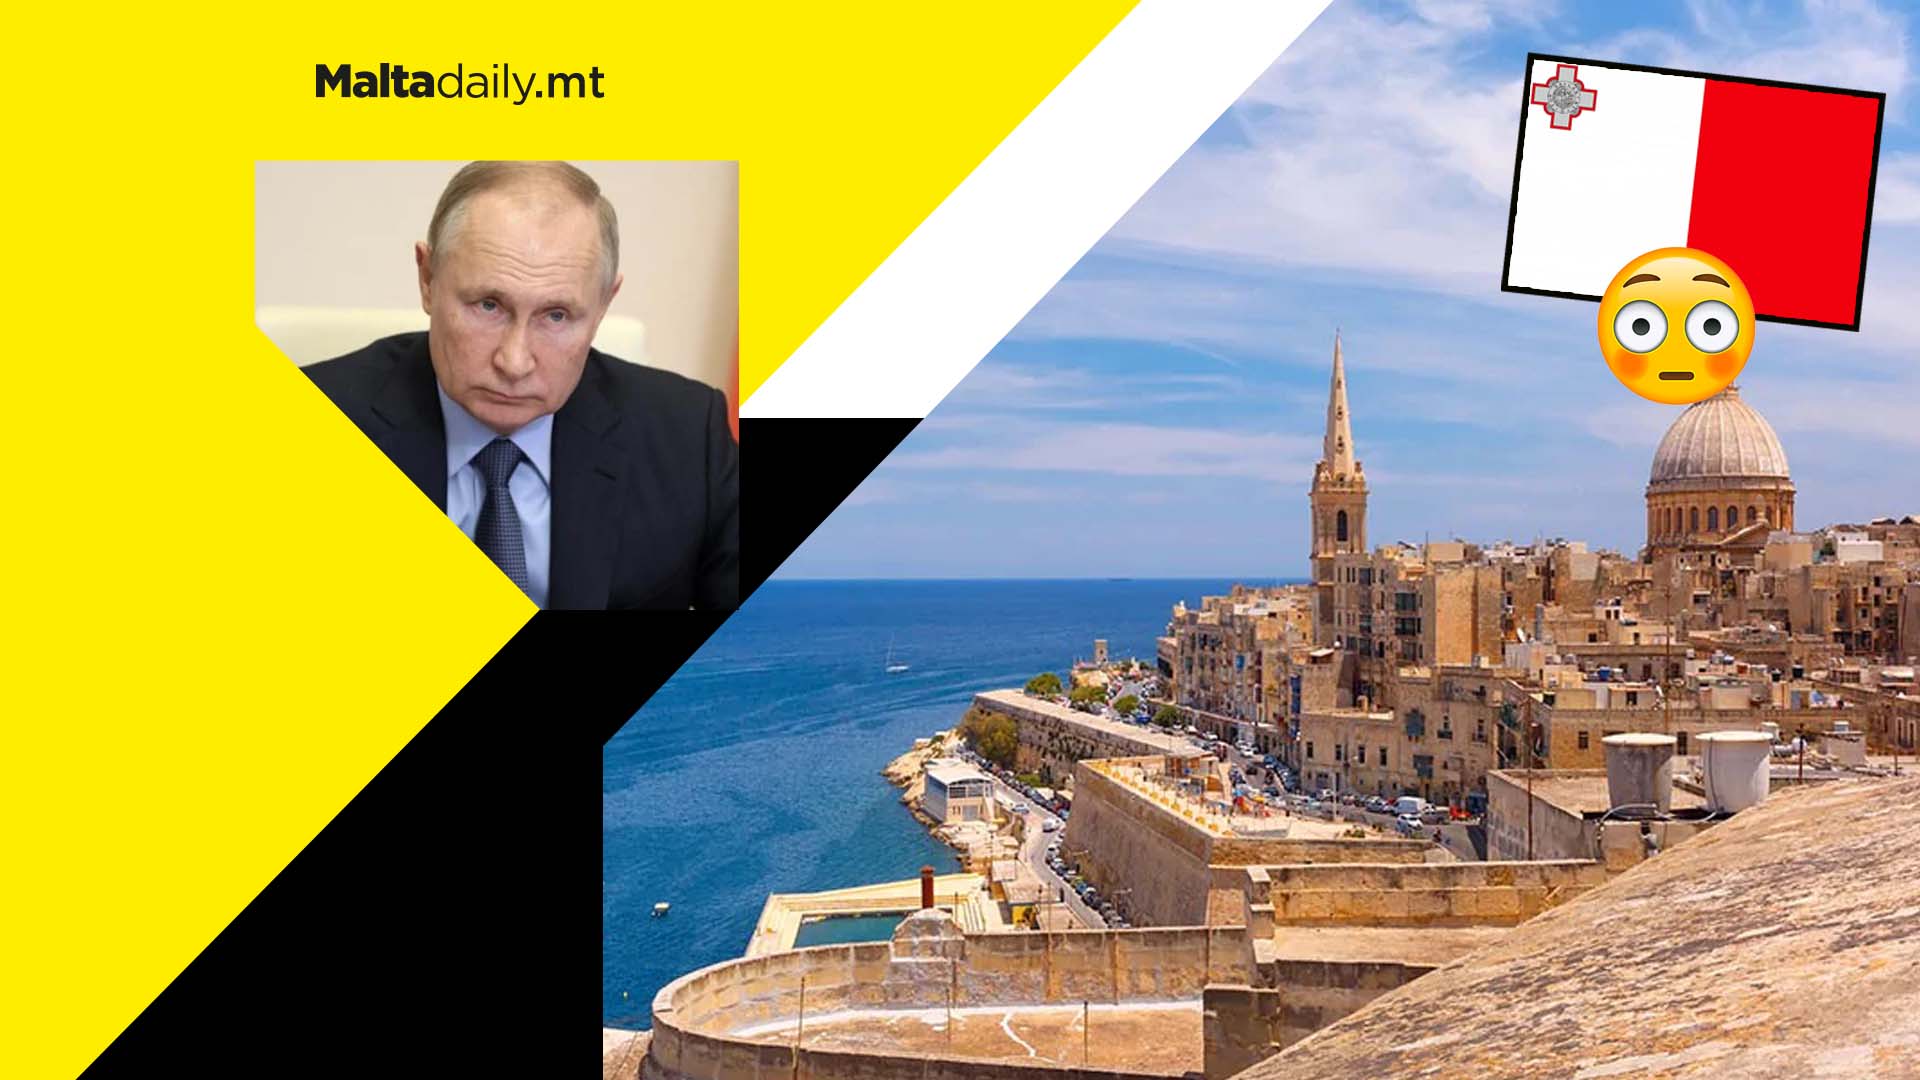 Malta made it onto Russia’s list of ‘unfriendly’ nations along with all of EU